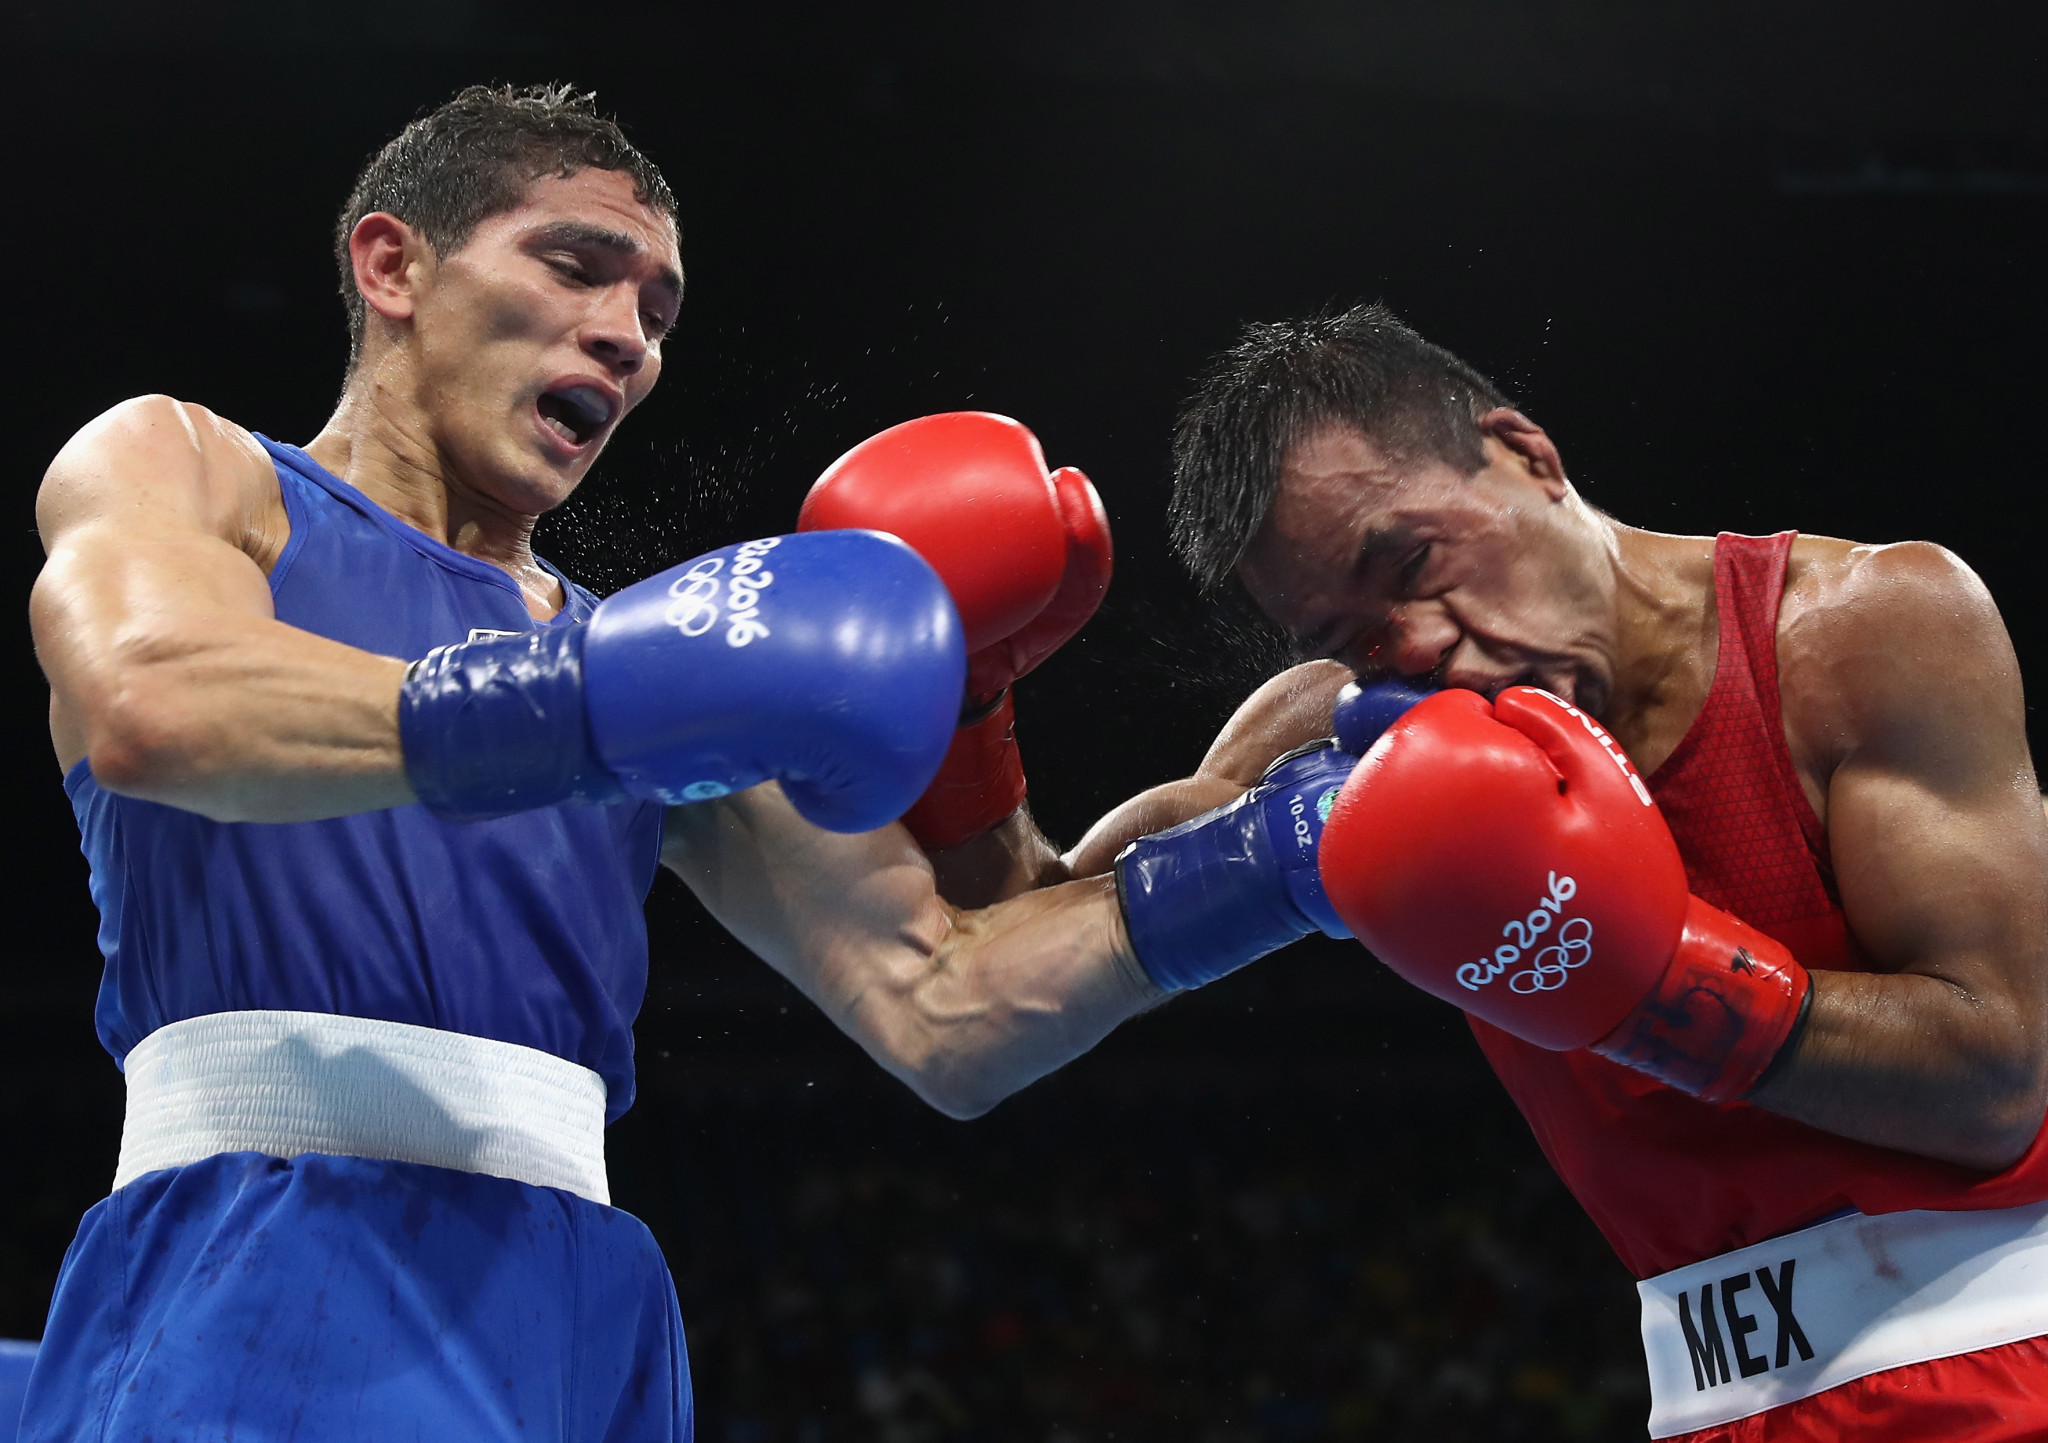 AIBA remains at risk of losing the right to organise the Olympic boxing tournament at Tokyo 2020 ©Getty Images